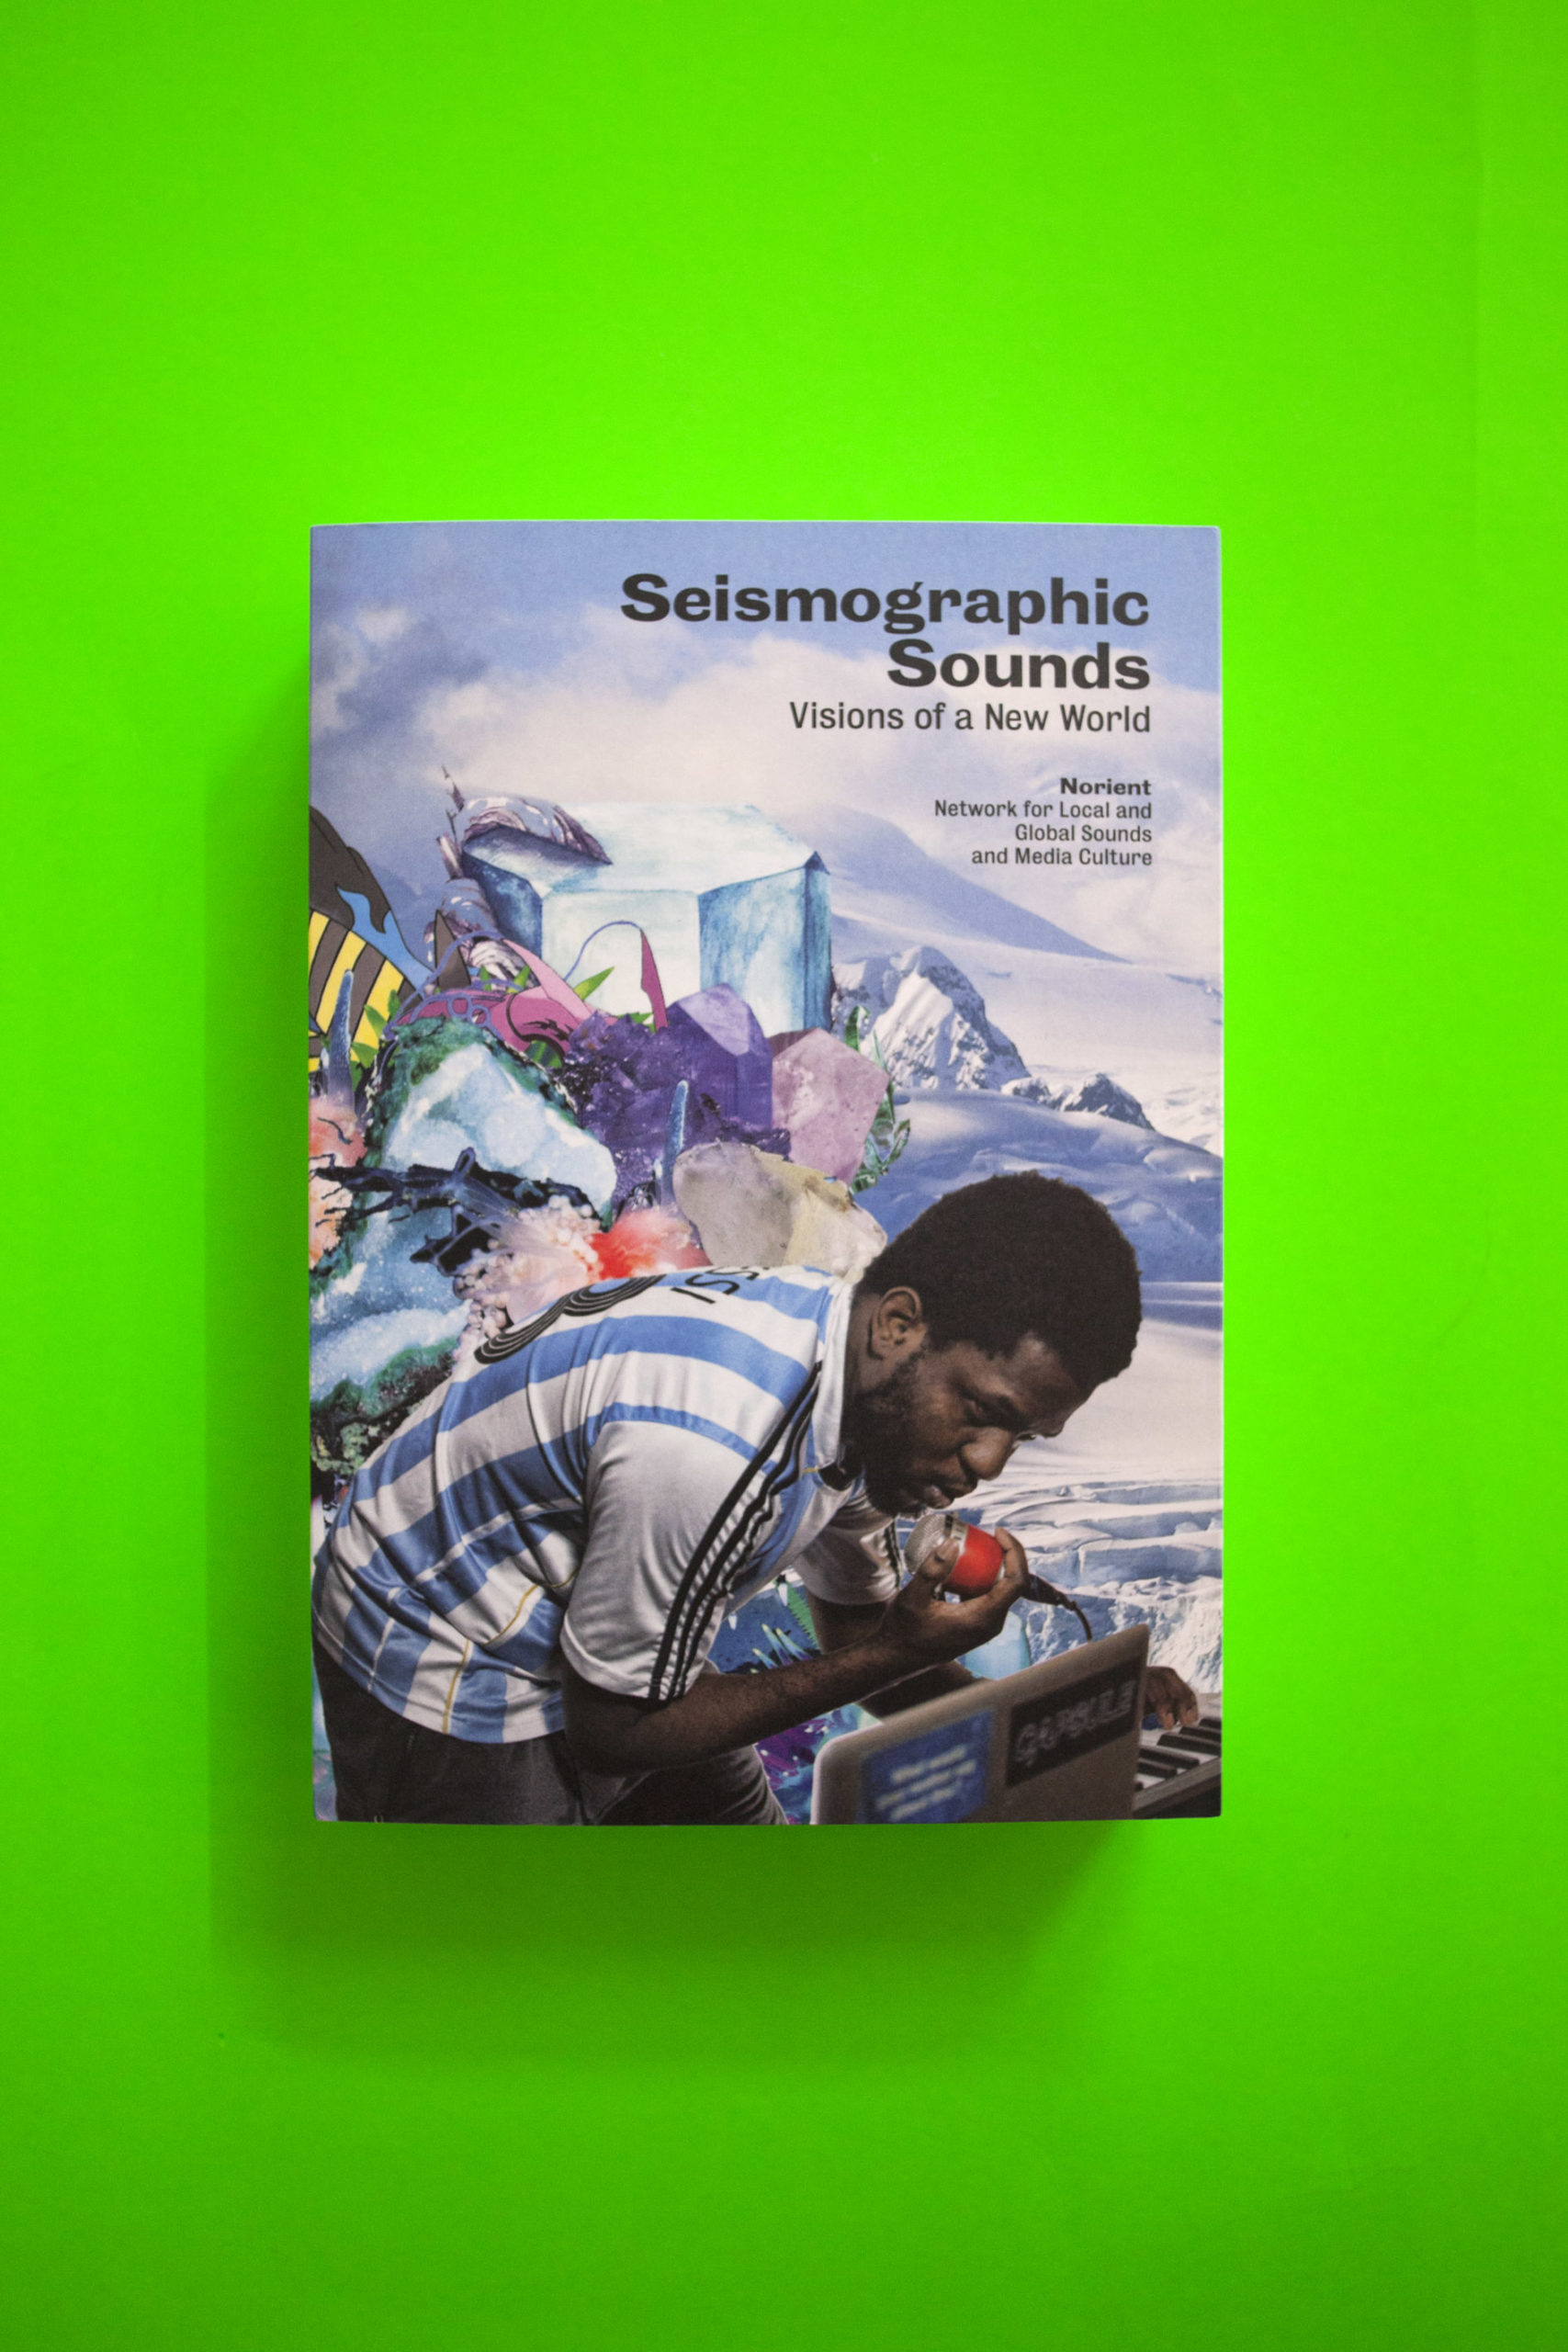 Seismographic Sounds. Visions of a New World